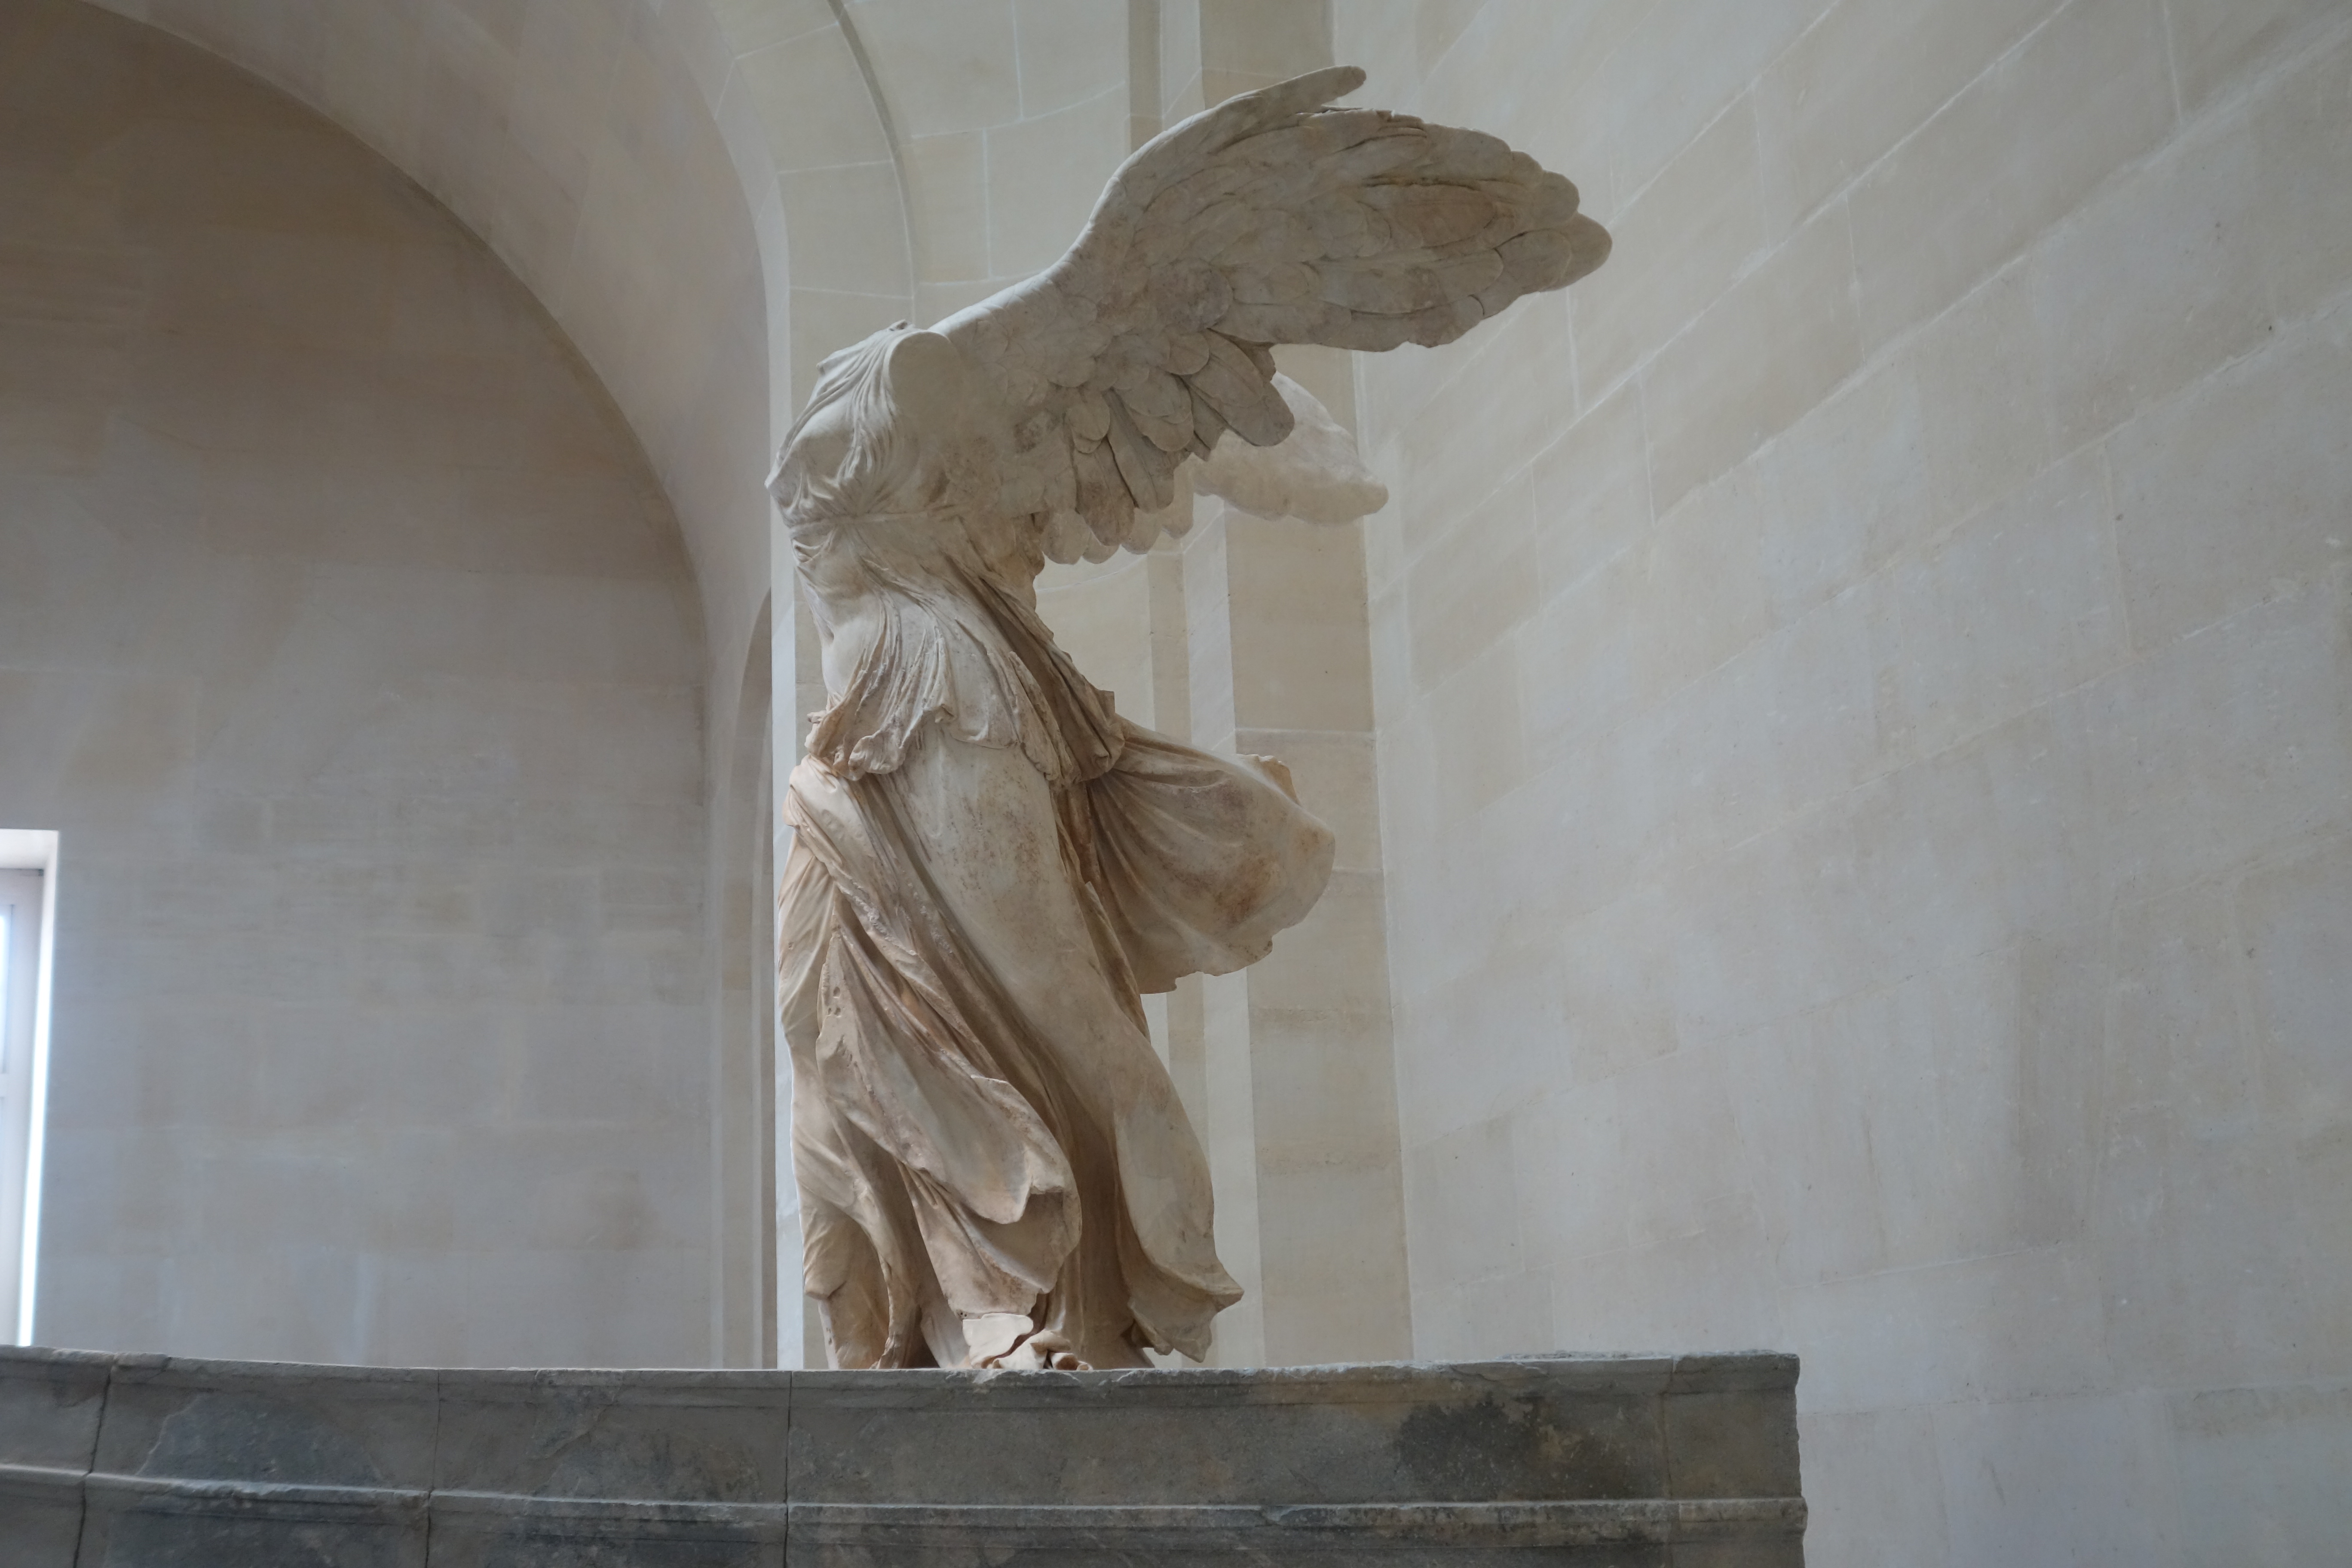 200 BC / Winged Victory of Samothrace, Louvre